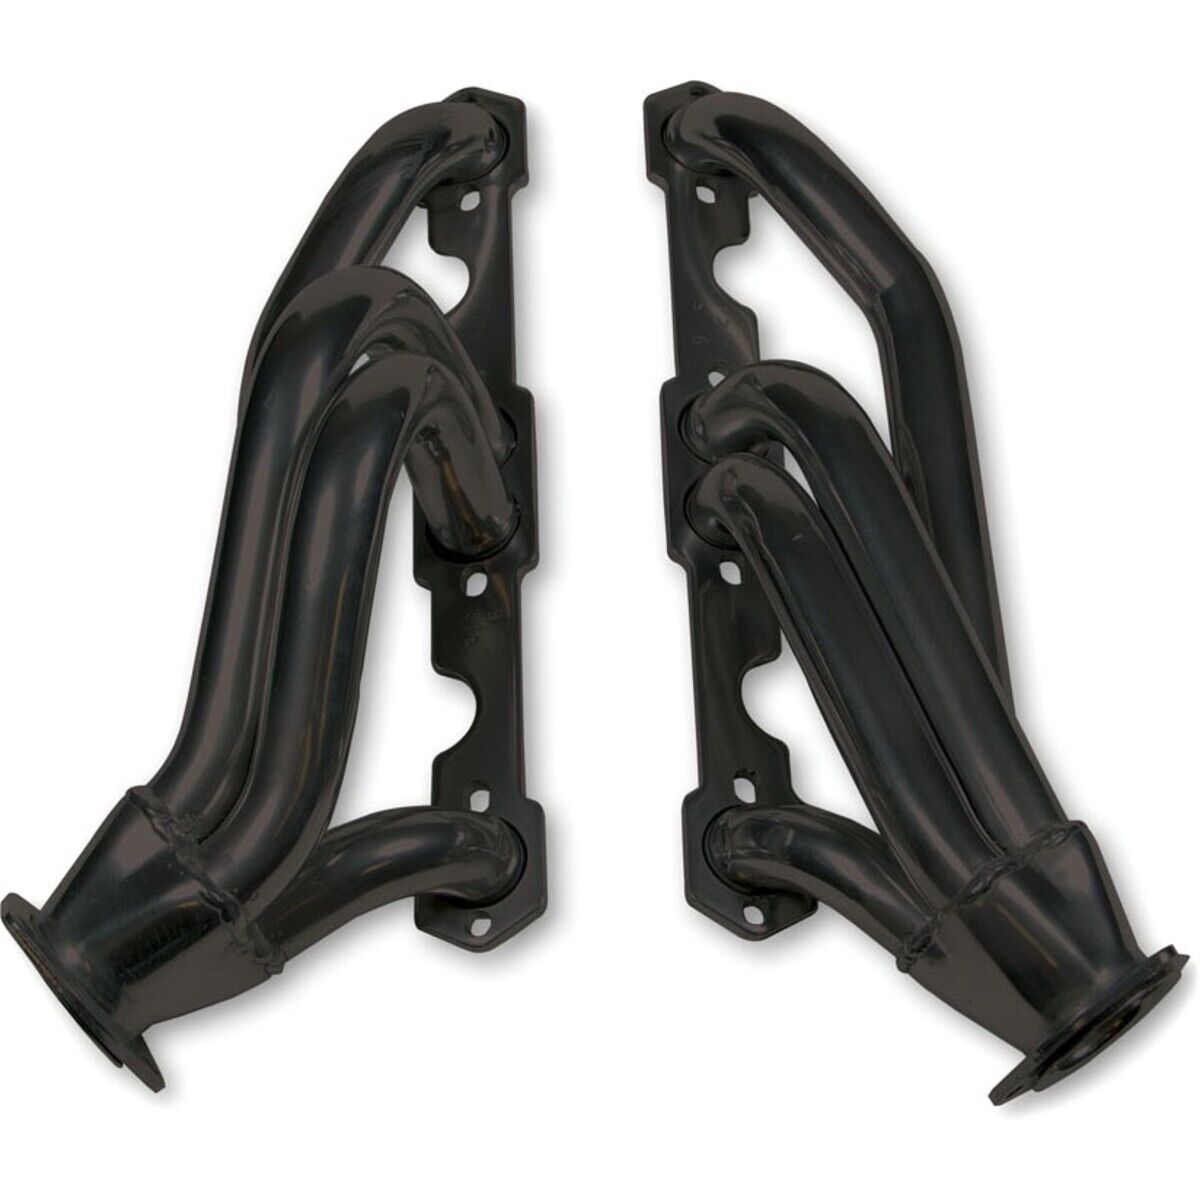 11502FLT Flowtech Headers Set of 2 for Chevy Blazer S10 Pickup S-10 S15 Pair